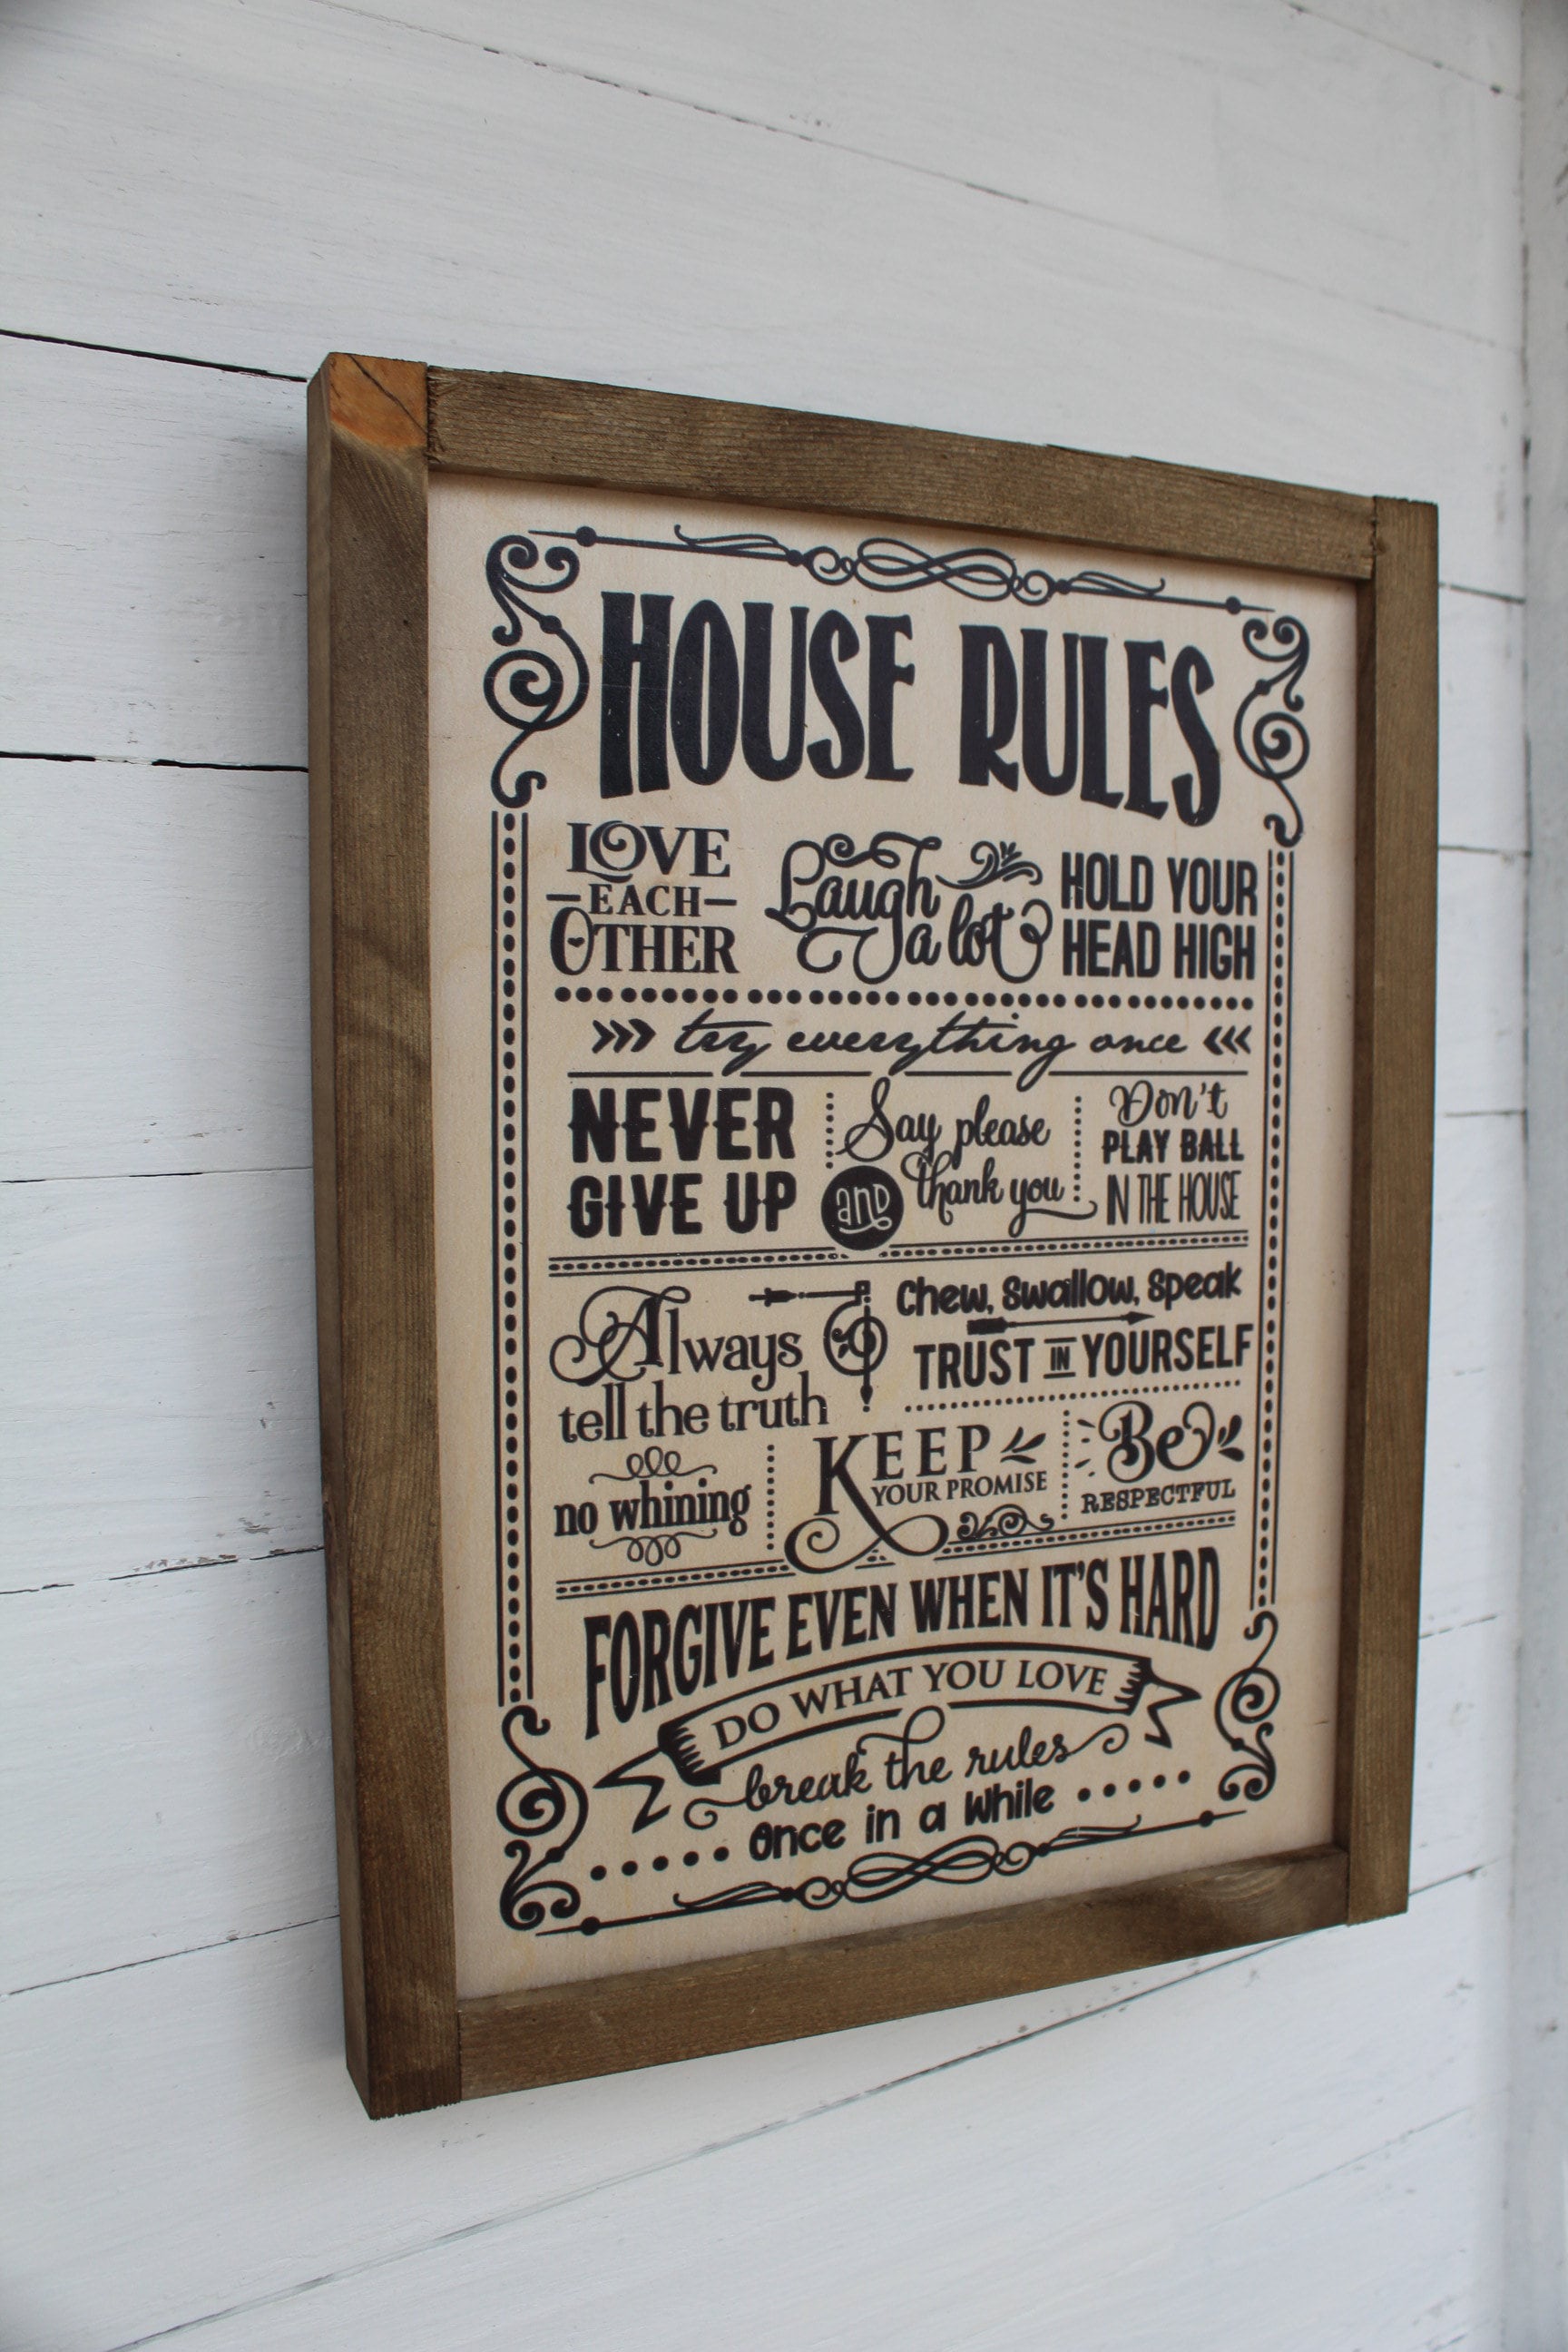 House Rules Wood Sign If You Slept In It Feed It Love It Hang It Up Funny Cute House Warming Gift Rustic Pallet Farmhouse Primitive Wall